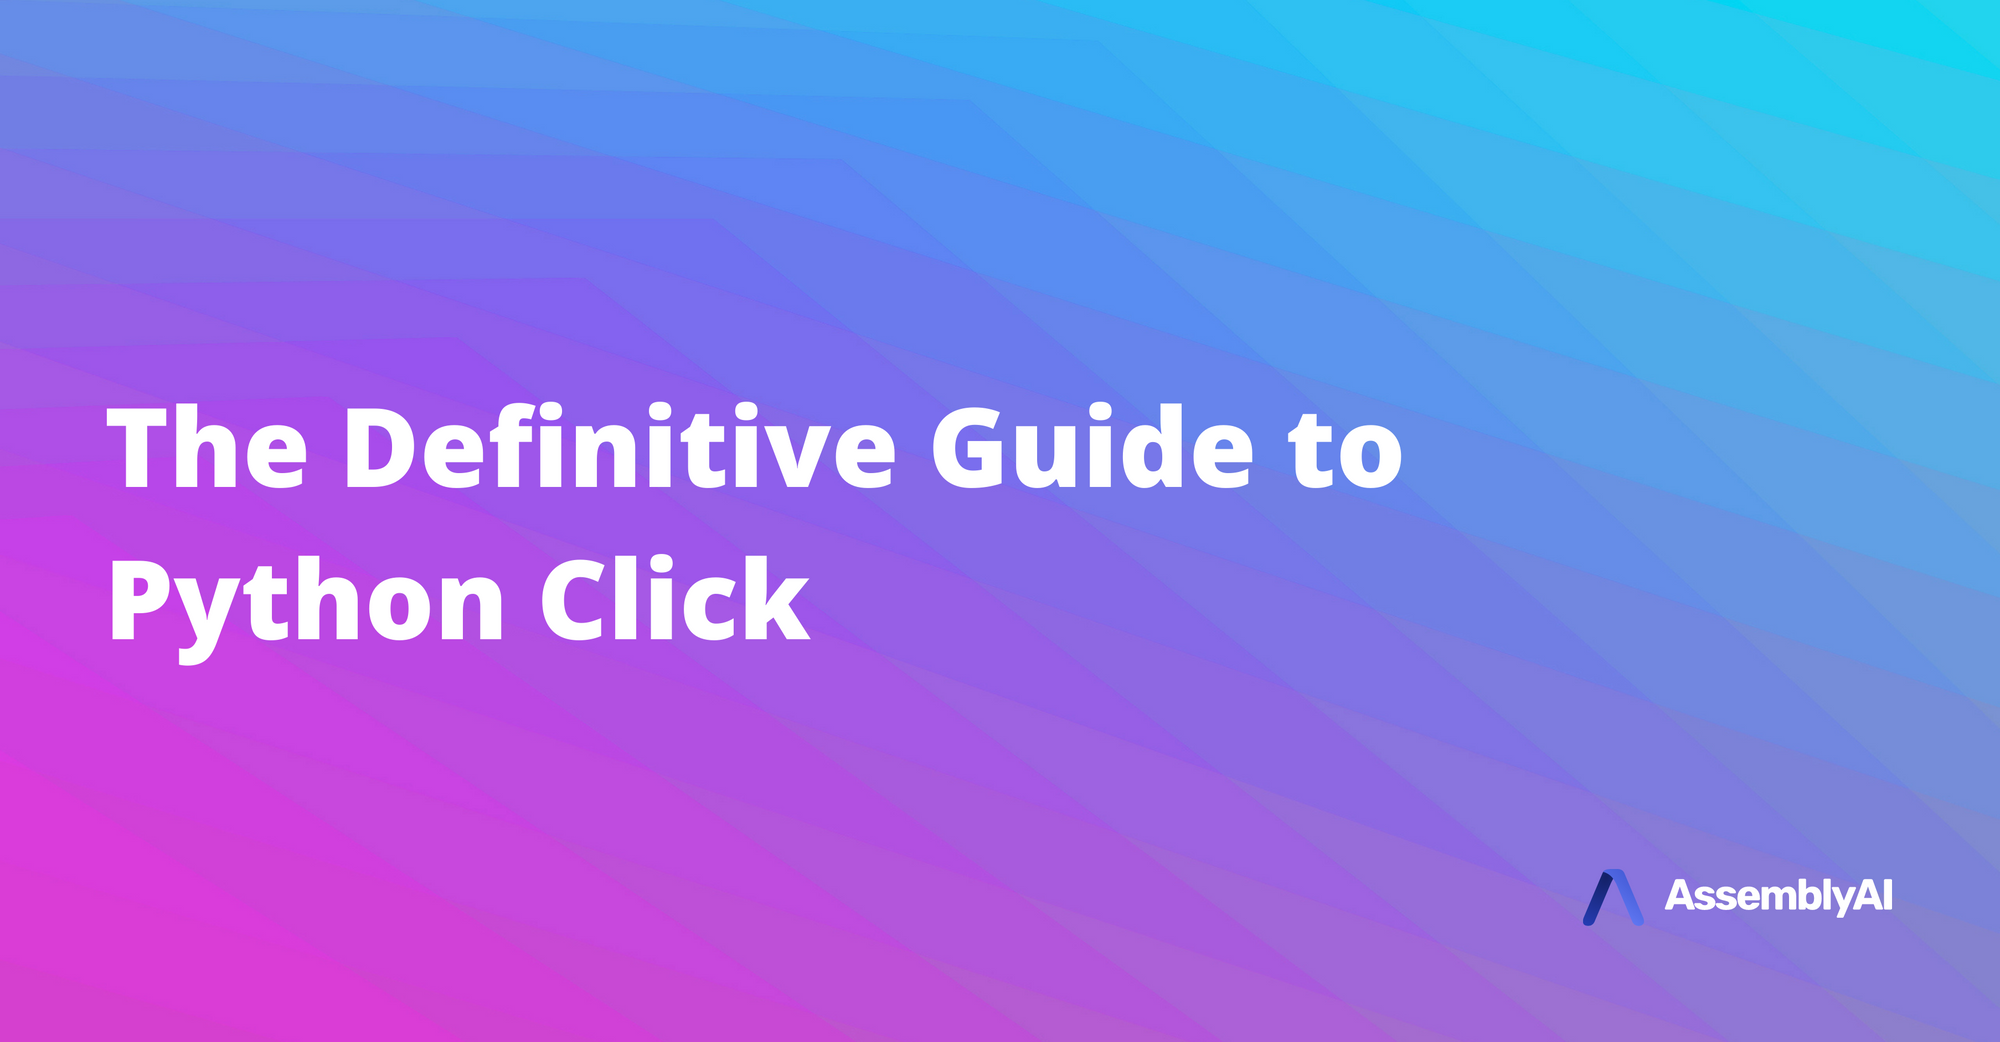 The Definitive Guide to Python Click